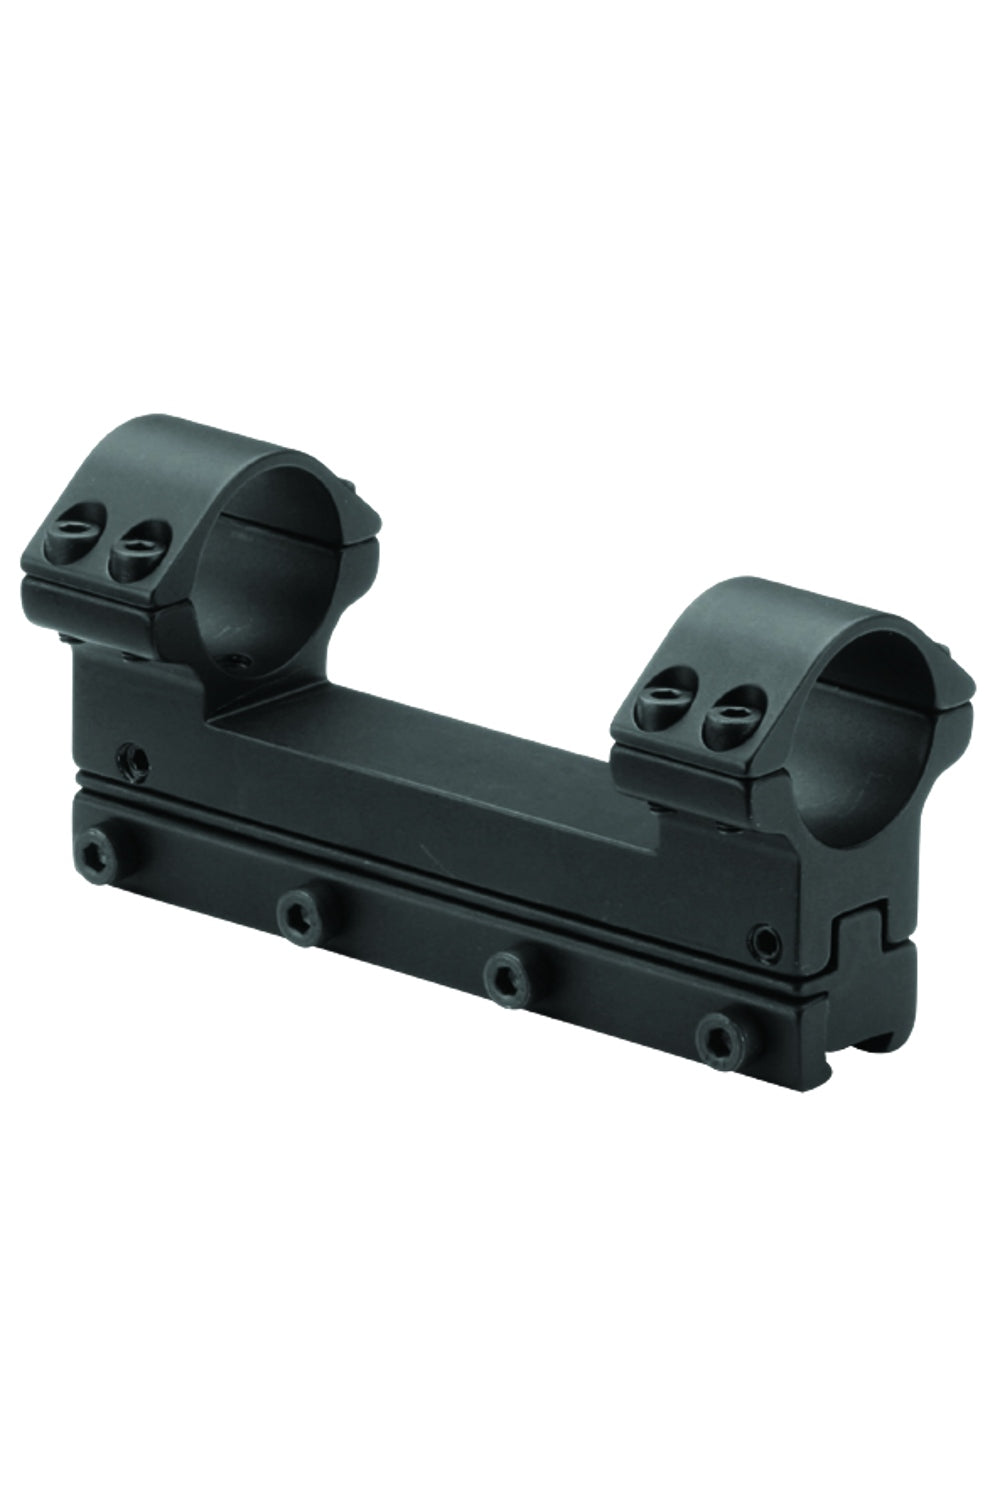 Bisley One Piece Angled Mounts in 25mm high adjustable